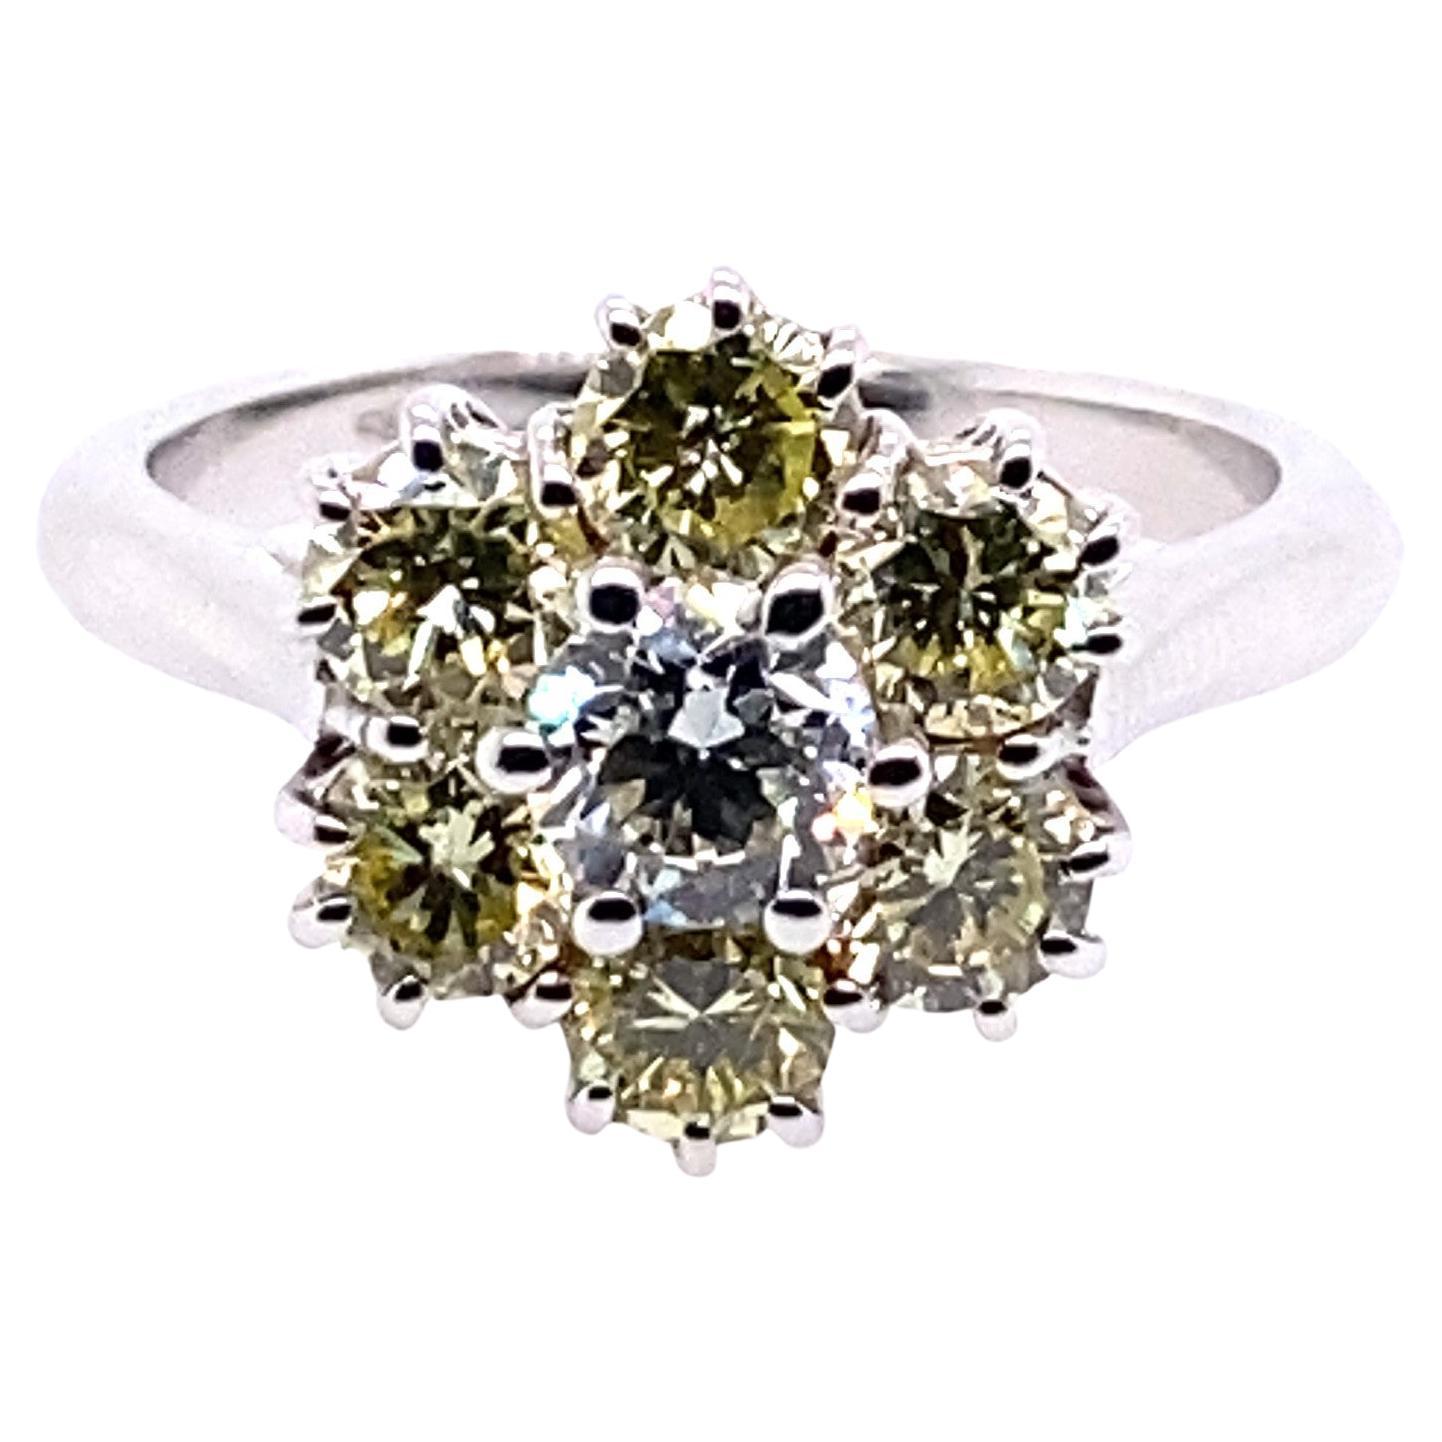 This magnificent ring is suitable for any occasion from cocktail to anniversary.  Masterfully created entirely by hand from 18-karat white gold, it contains 1.78-carats of white F/G VVS and VS (light colour fancy) yellow diamonds. The top of the